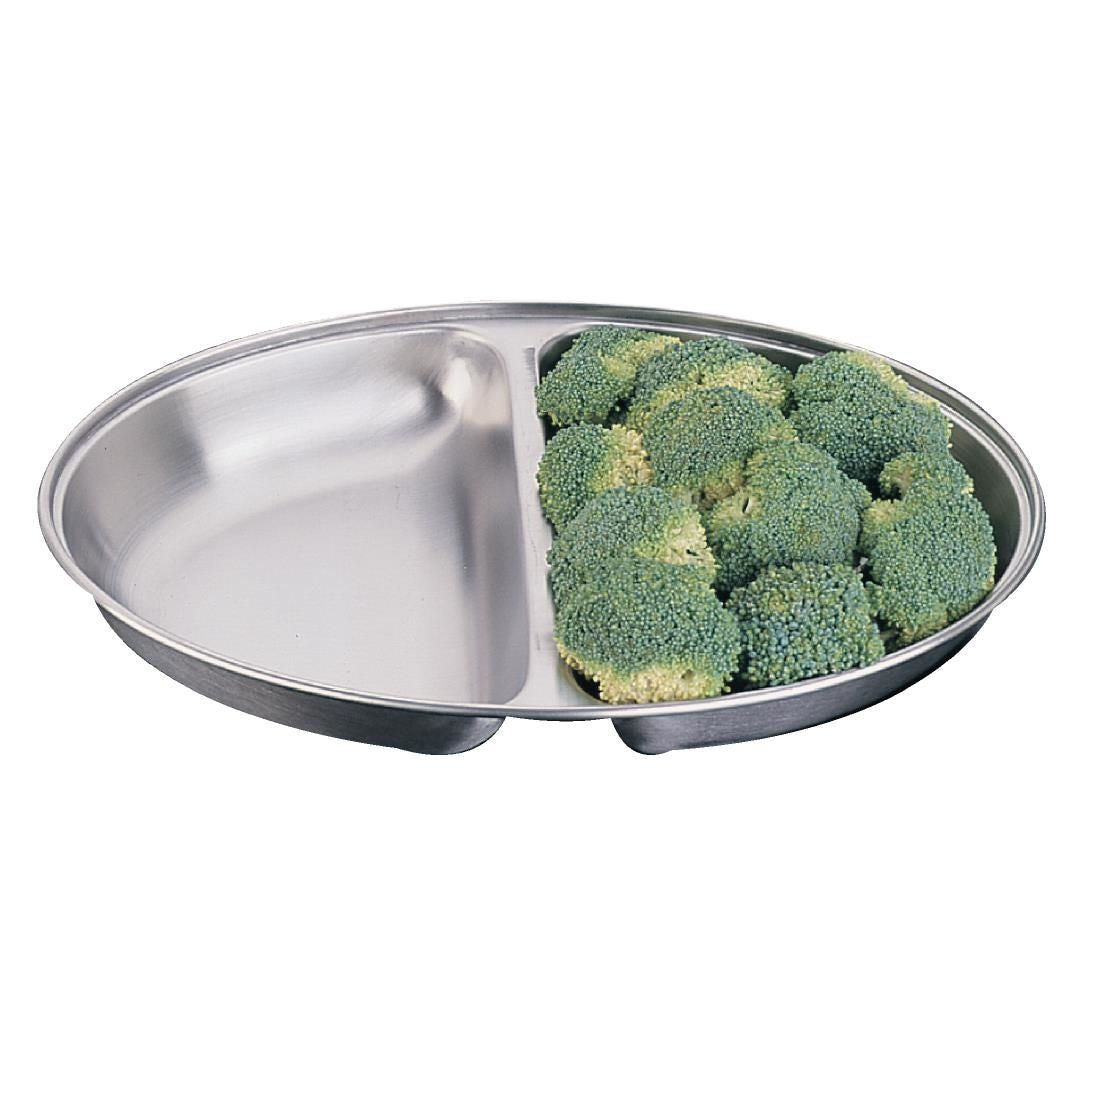 P185 Olympia Oval Vegetable Dish Two Compartments 252mm